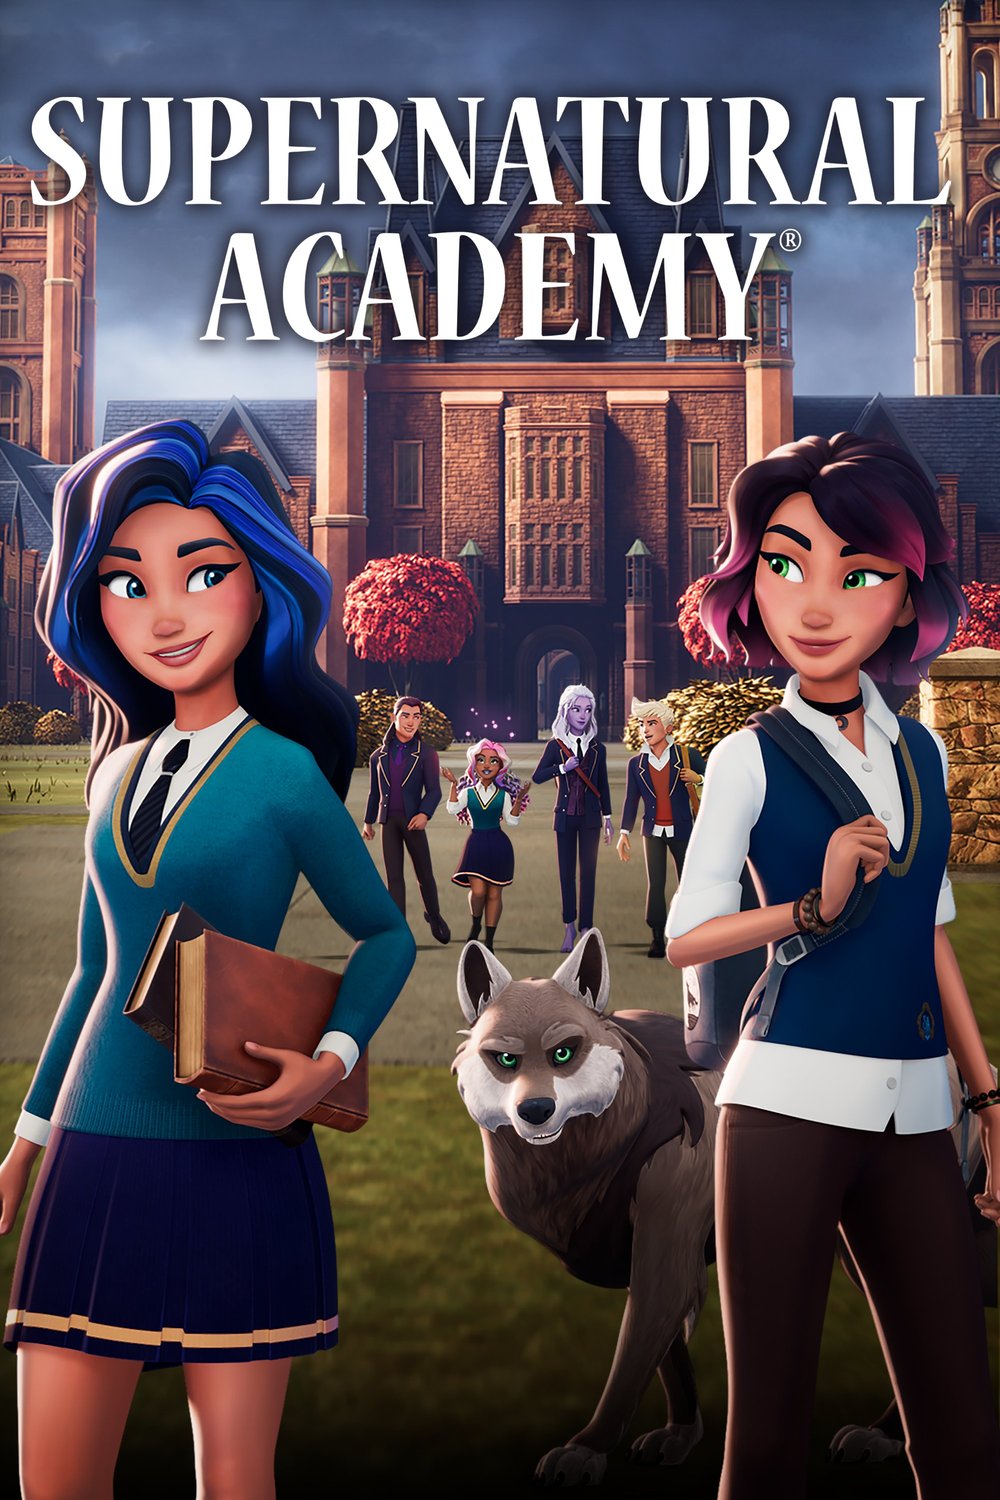 Poster of the movie Supernatural Academy